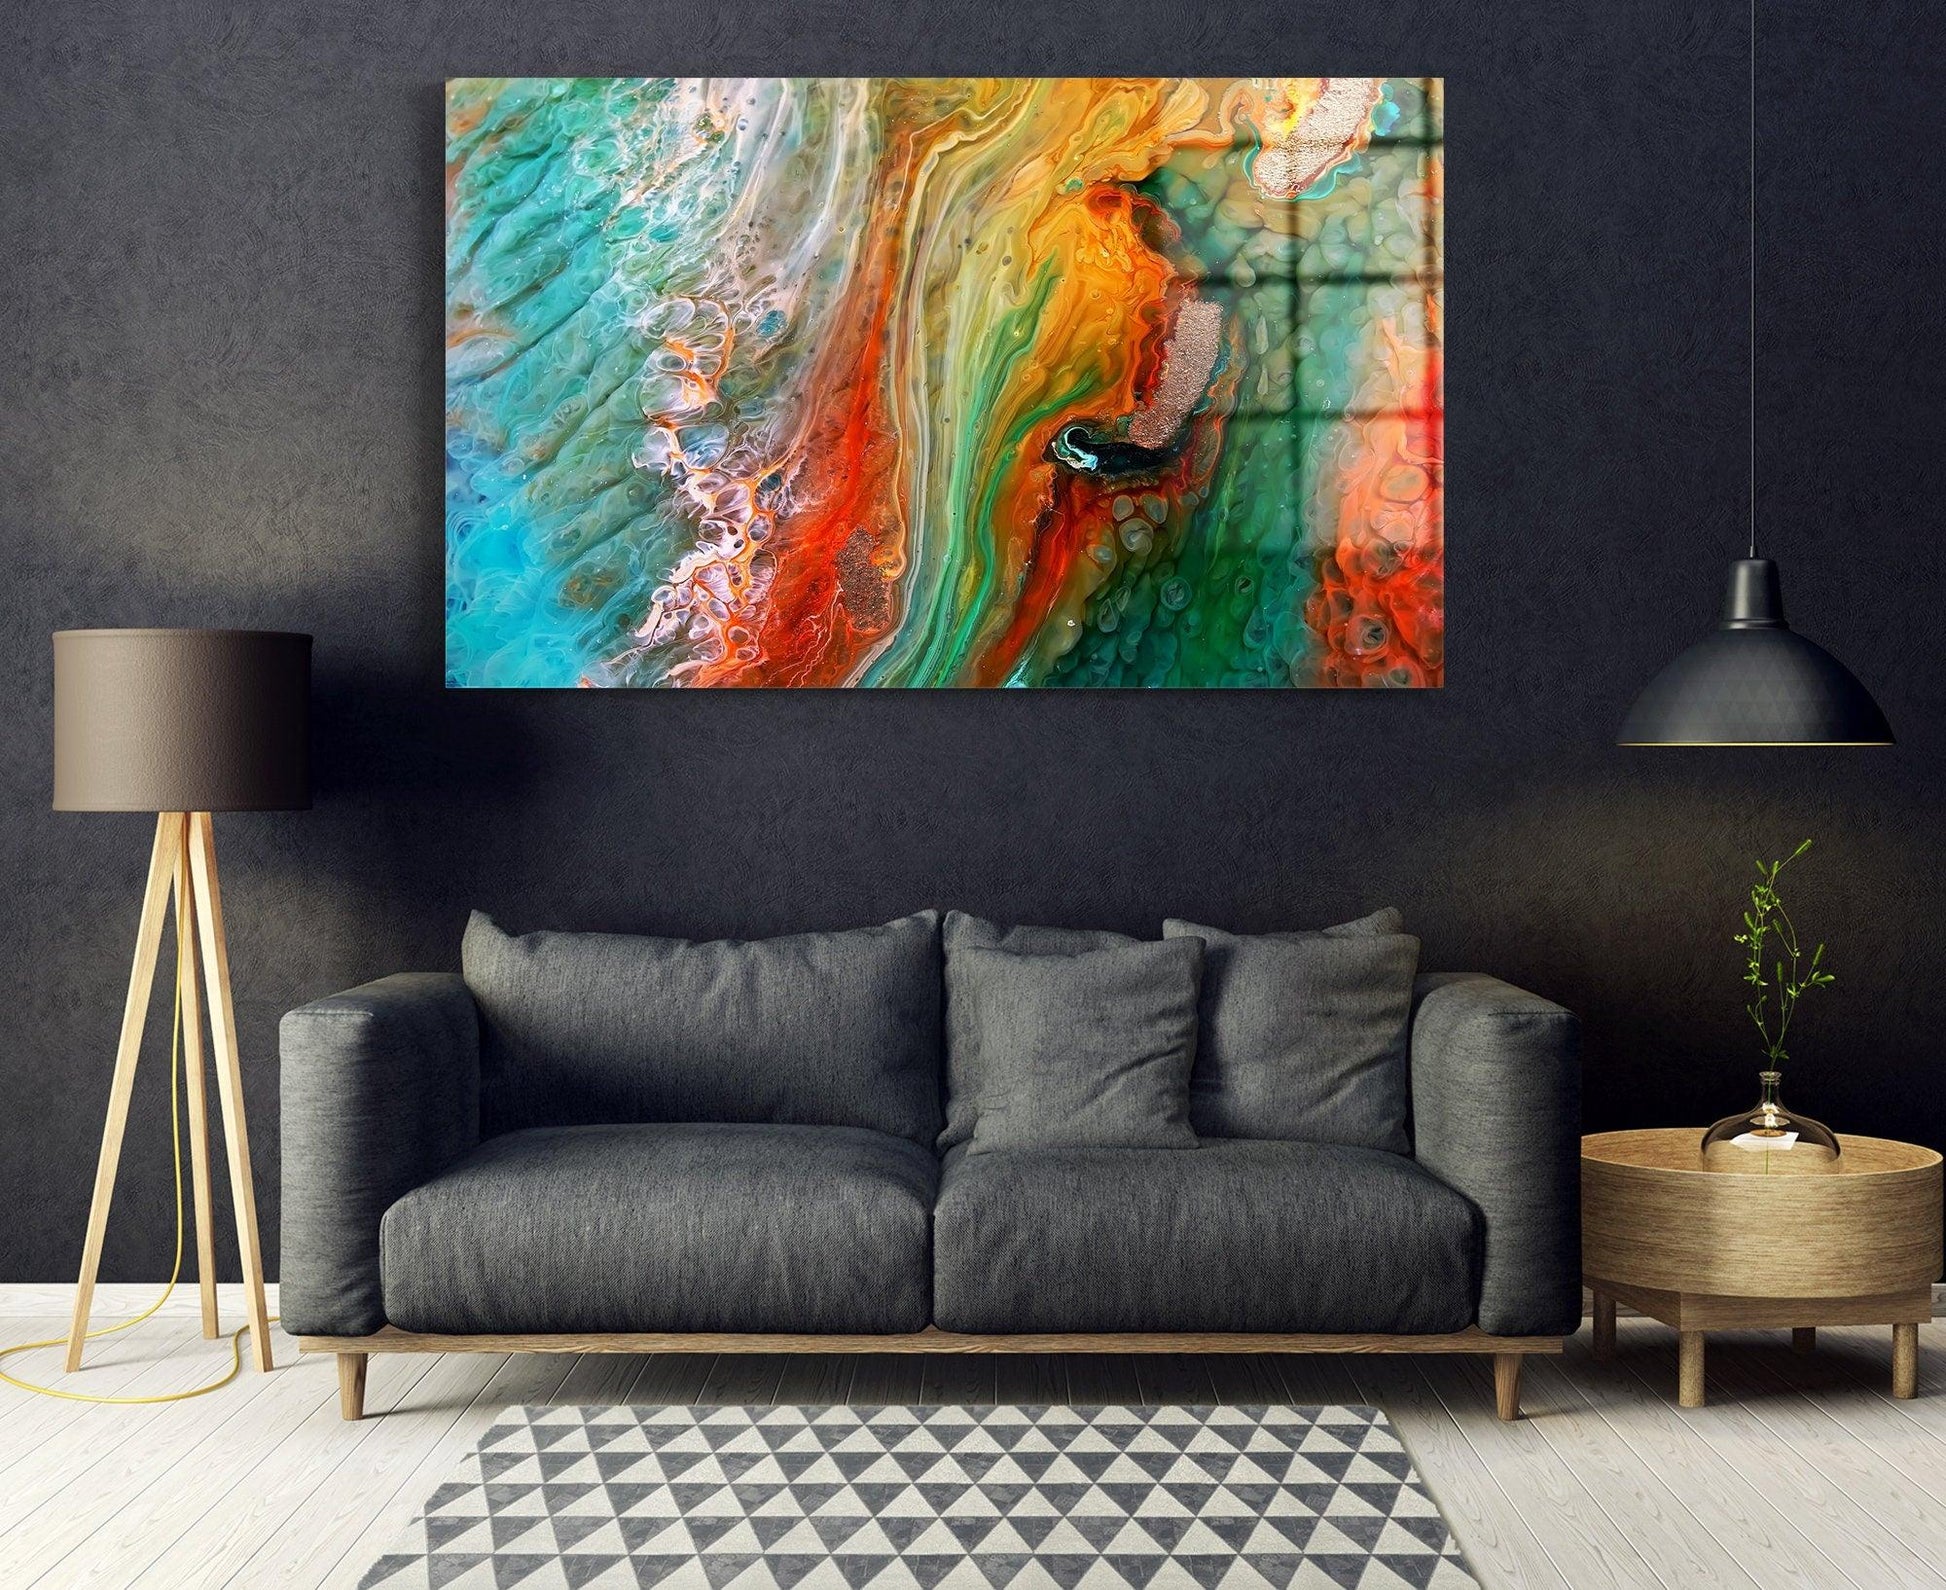 Cosmic Liquid wall Art| Abstract Canvas, Poster Art Reproduction, Large Abstract Canvas Wall Art, Modern Art Expressionism Painting - TrendiArt